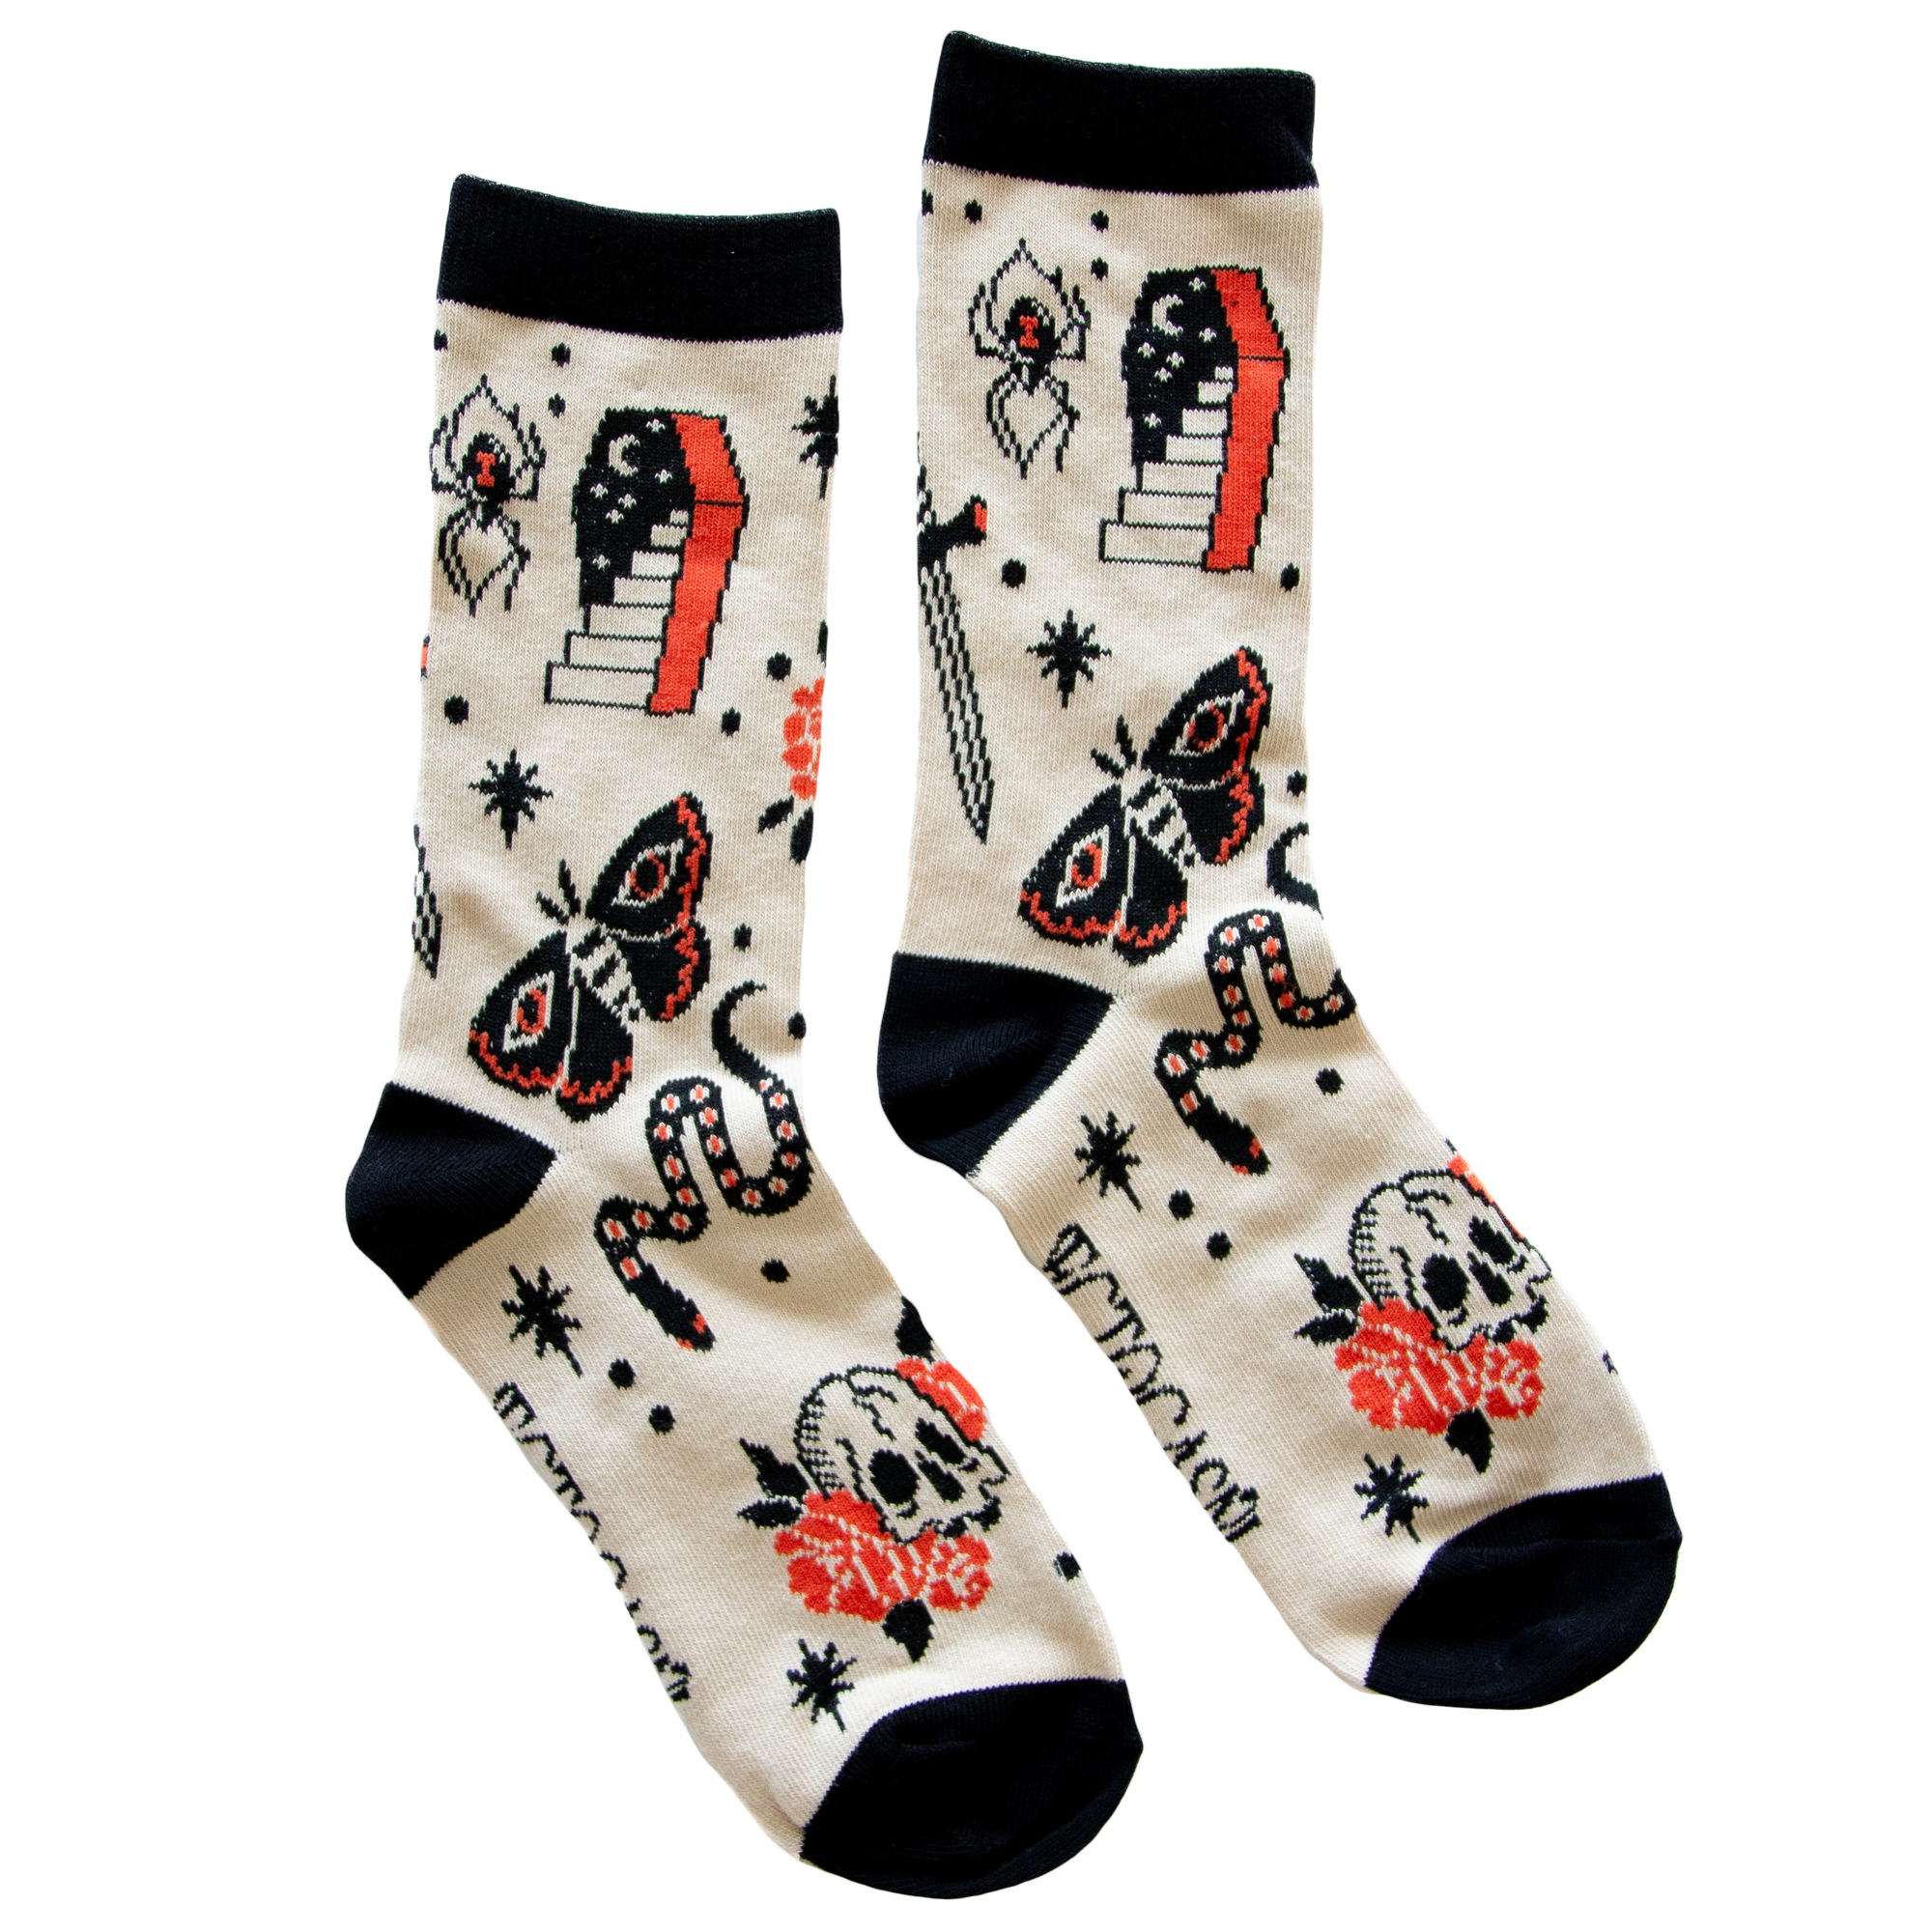 SHASHI CLASSIC Woman's Mesh Top Grip Socks with Dragonfly Tattoo Design